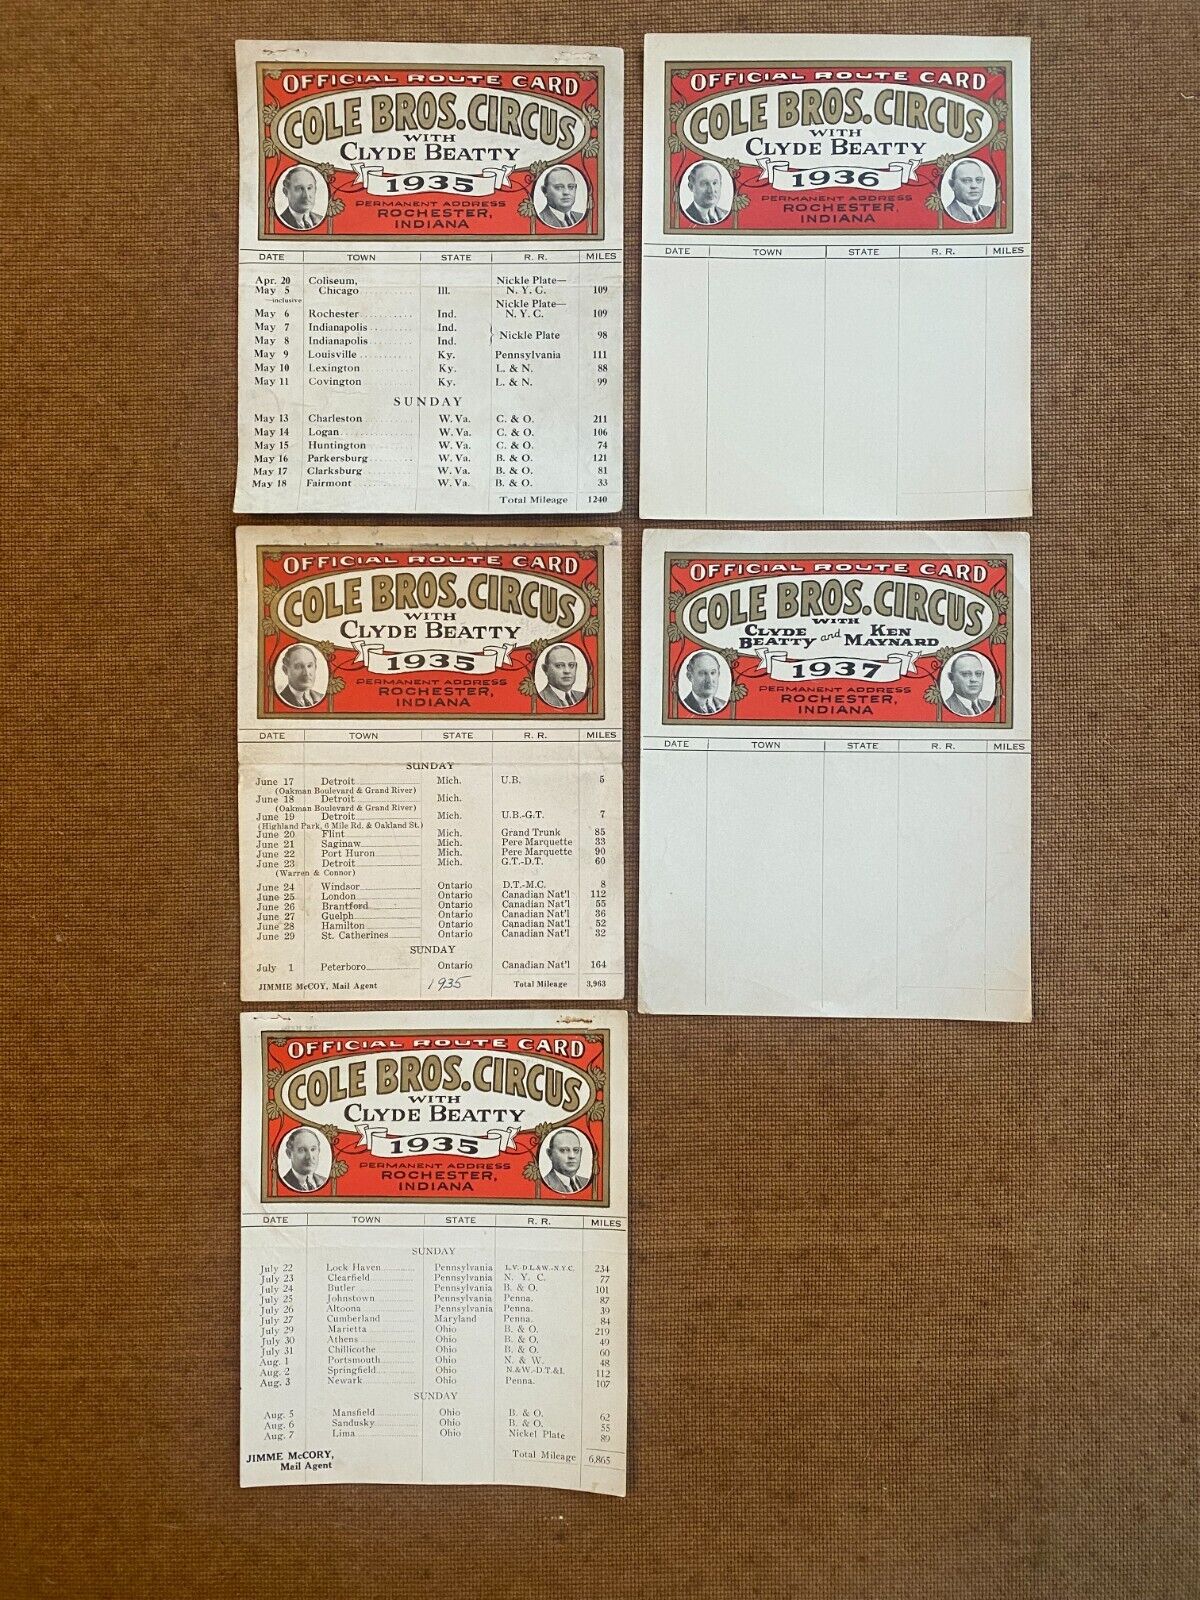 Lot of 5 Vintage Cole Bros Circus Clyde Beatty Old Route Cards 1935 1936 1937